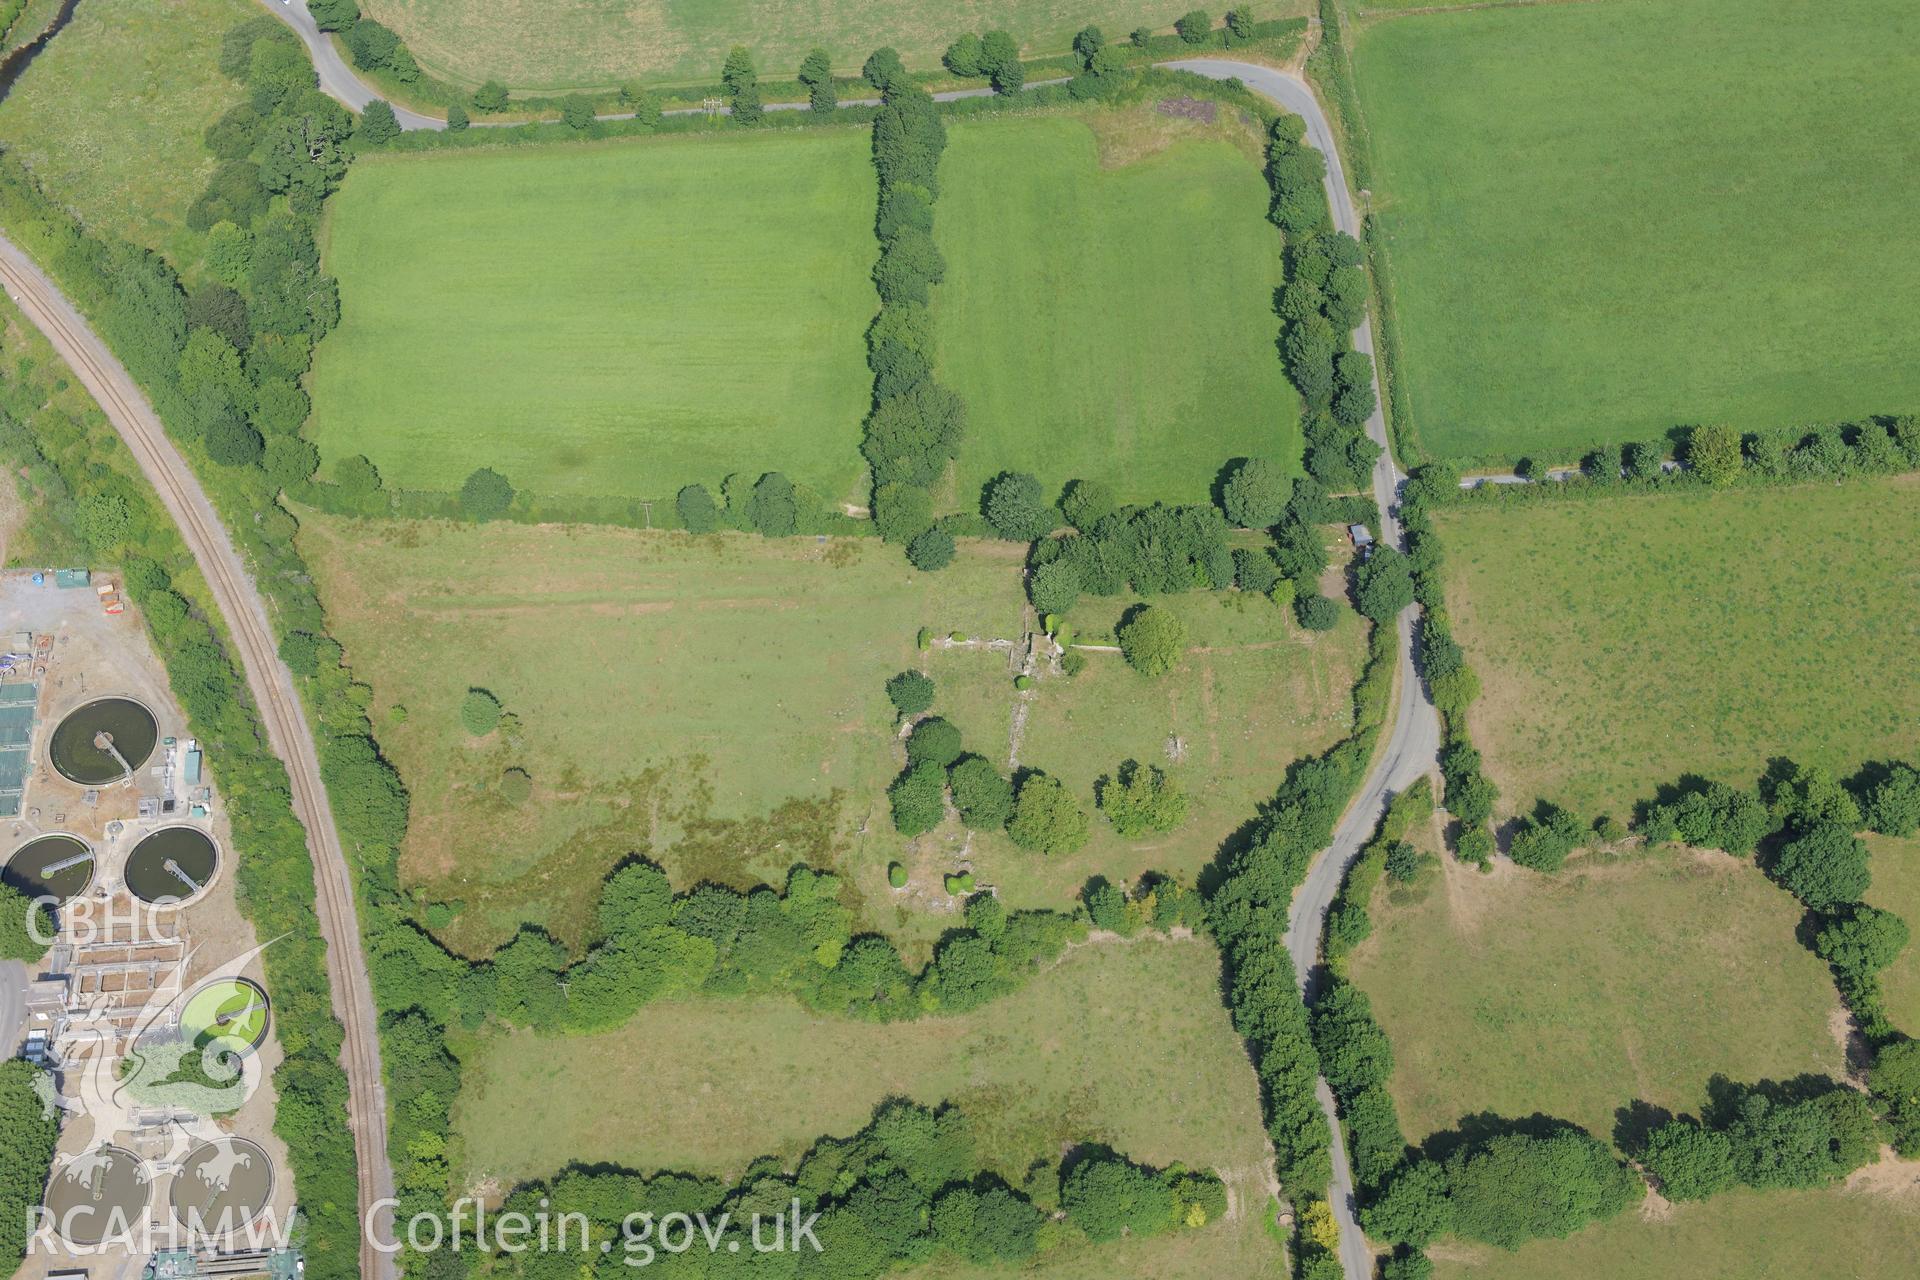 Haroldstone House and Haroldstone House garden earthworks, Haverfordwest. Oblique aerial photograph taken during the Royal Commission?s programme of archaeological aerial reconnaissance by Toby Driver on 16th July 2013.